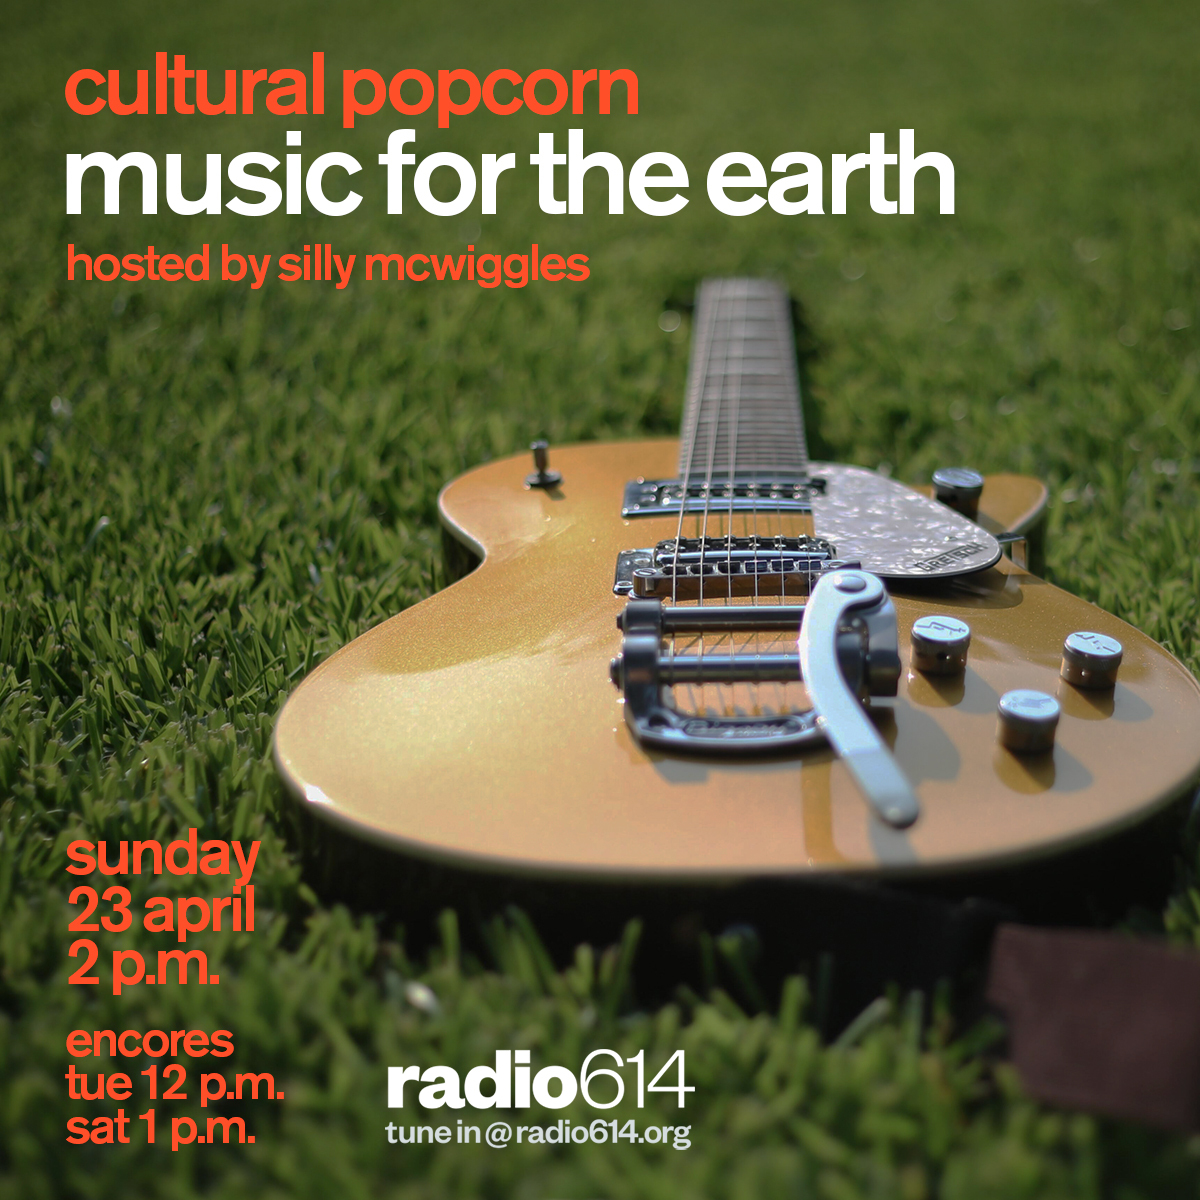 'Bloom' from our 'Shine on You' EP is being featured on Cultural Popcorn's 'Music for the Earth' episode on @radio614 from the US on Sunday, 23 Apr at 2 PM EDT (US time)  for the Earth' @SillyMcWiggles @culturalpopcorn  #environmentalmusic #WorldEarthDay #environment #piperlain